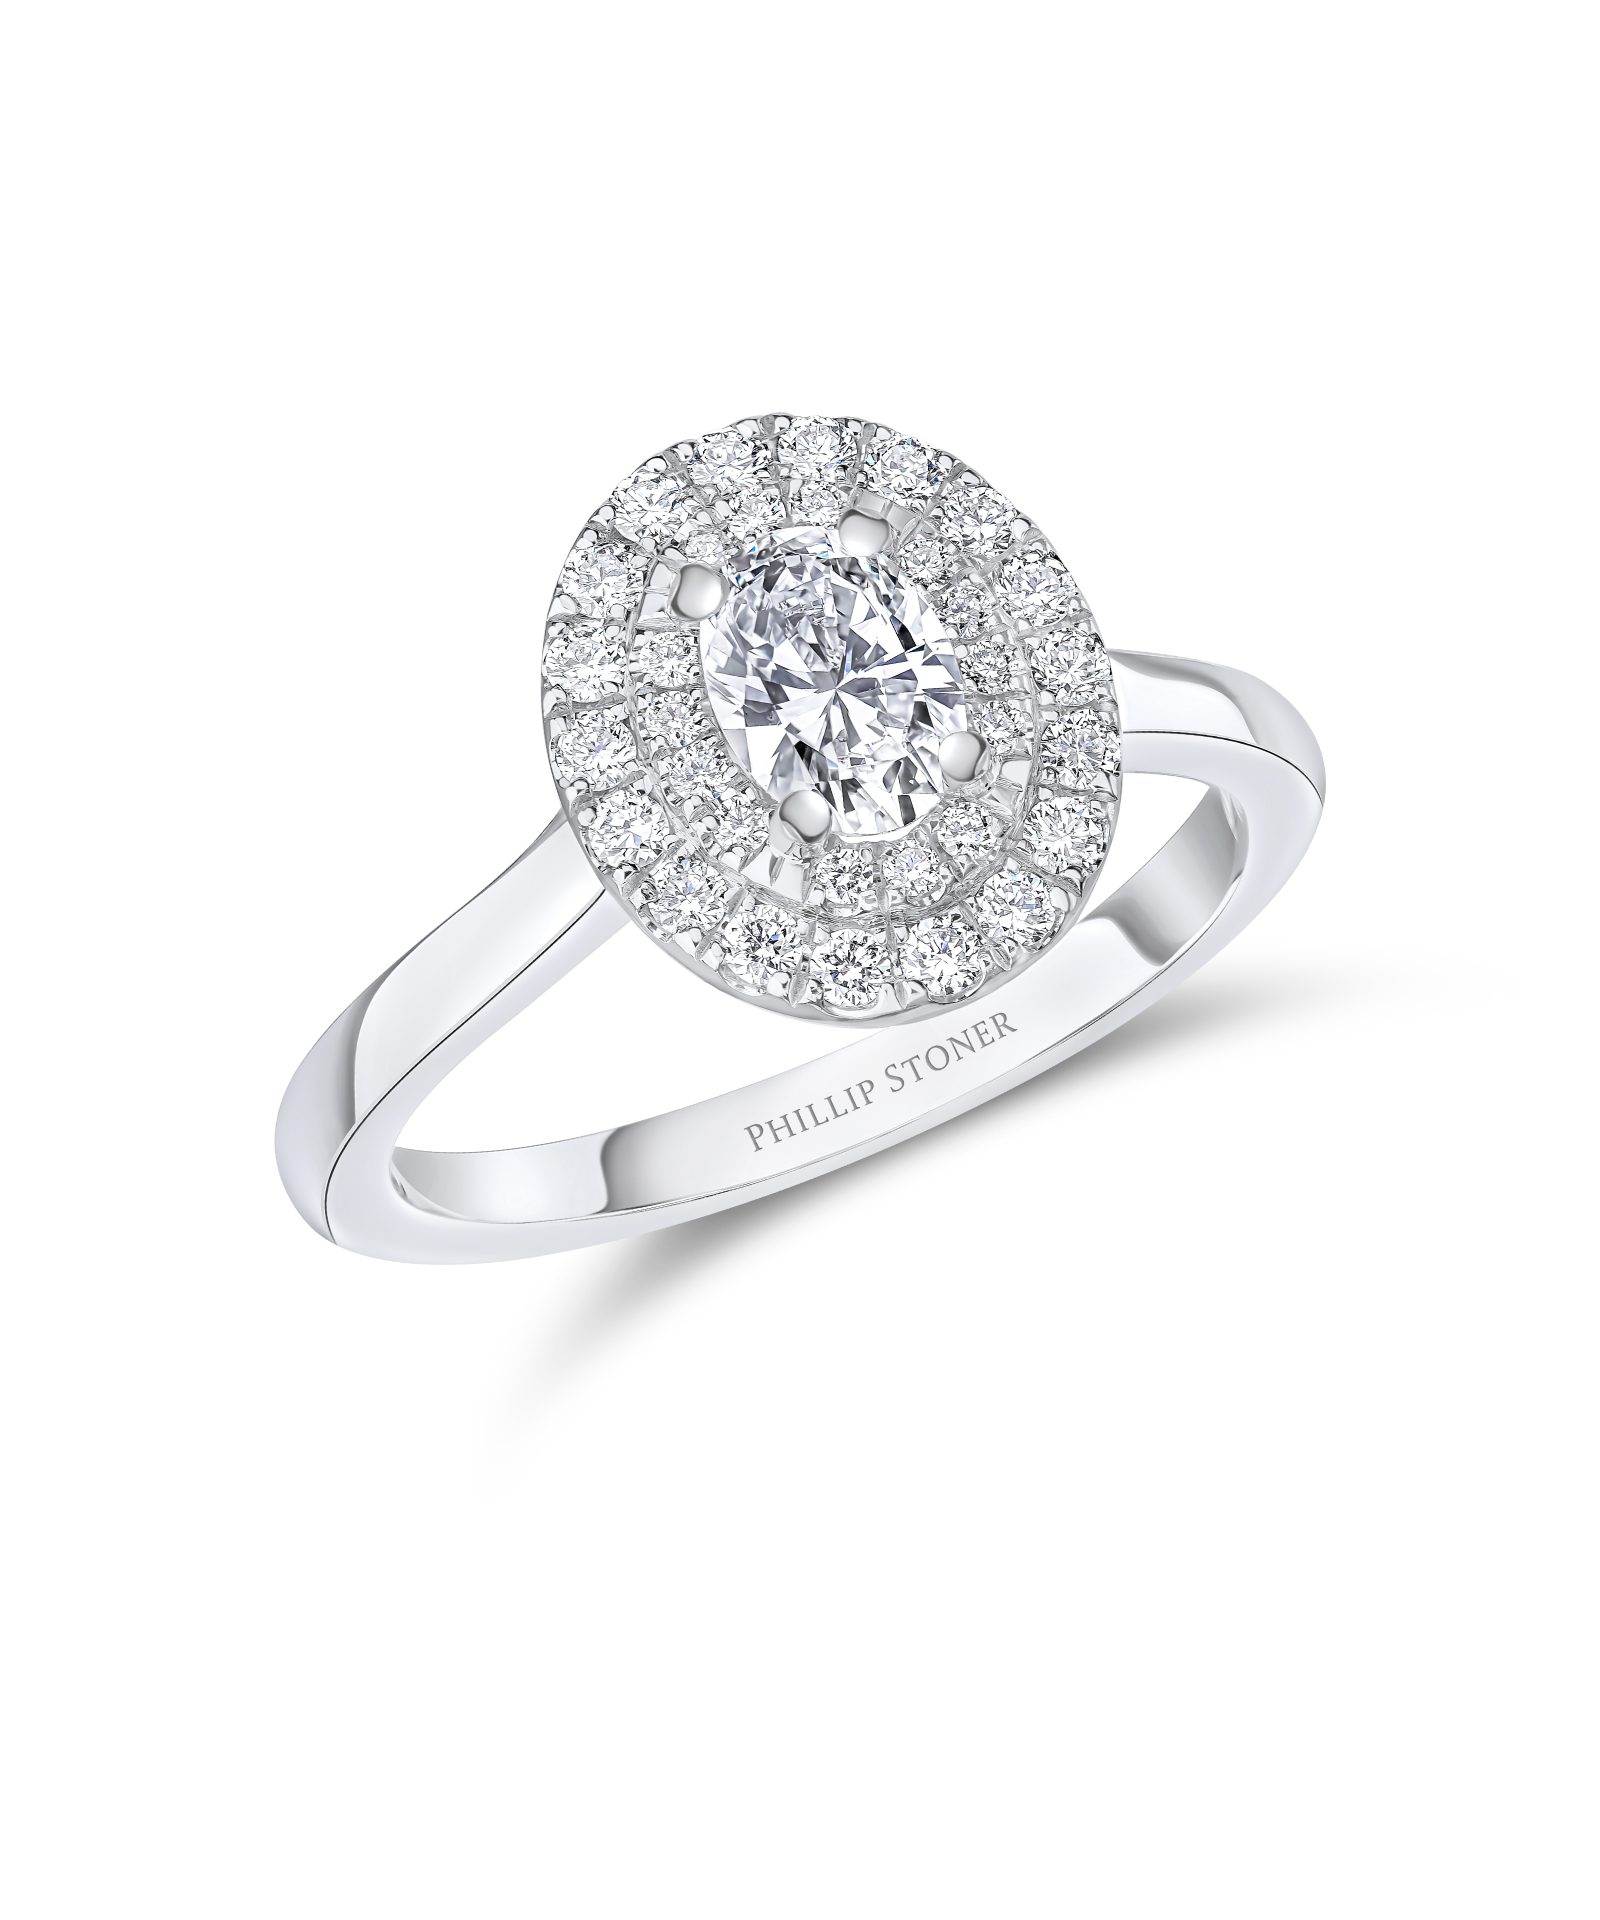 0.50ct Oval Cut Illusion Set Diamond Halo Ring with plain shoulders - Phillip Stoner The Jeweller